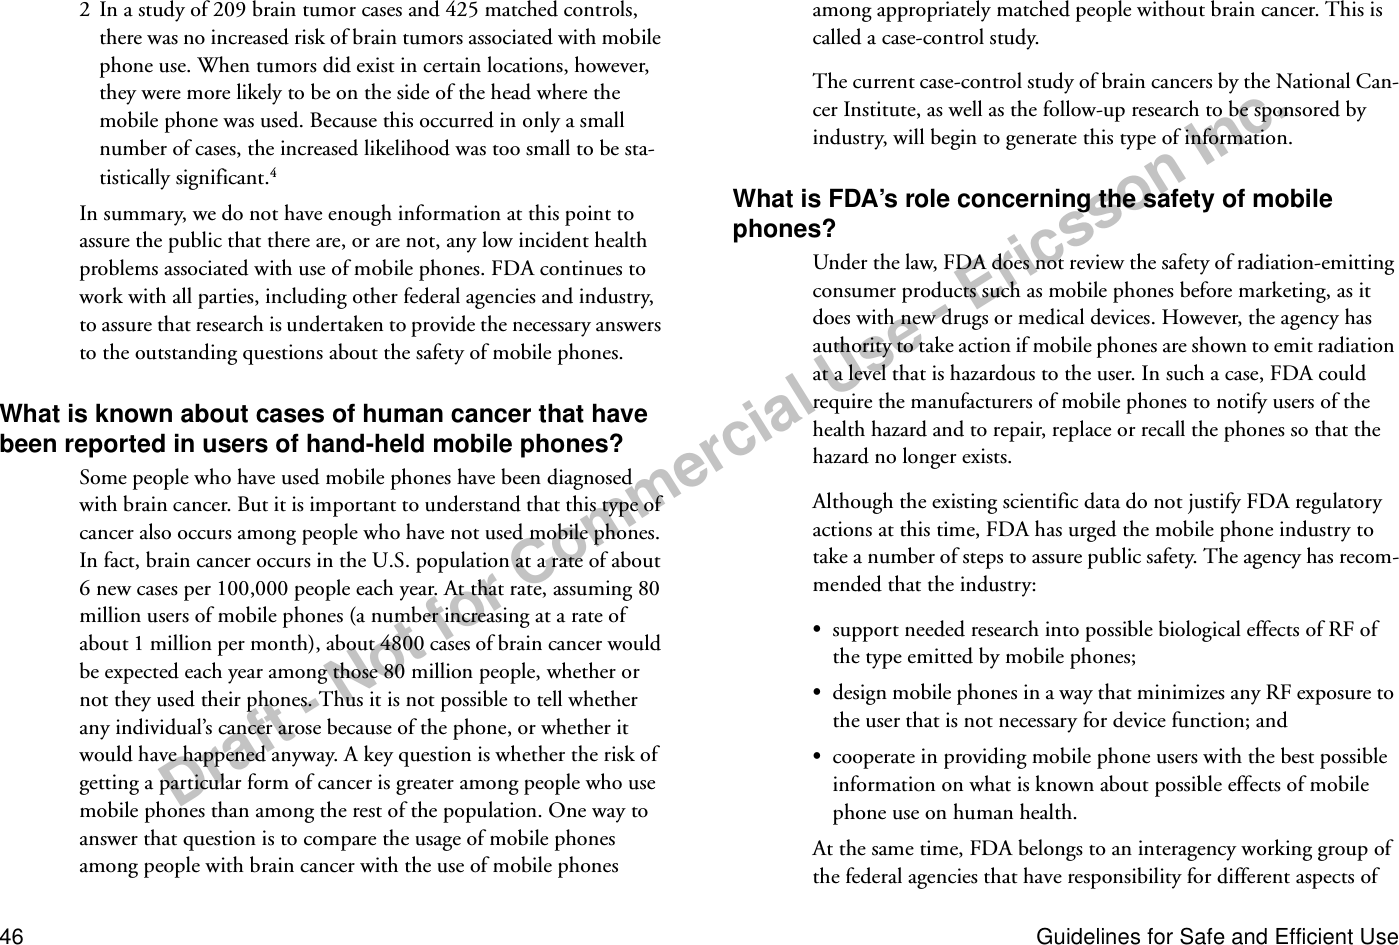 Draft - Not for Commercial Use - Ericsson Inc.46 Guidelines for Safe and Efficient Use2  In a study of 209 brain tumor cases and 425 matched controls, there was no increased risk of brain tumors associated with mobile phone use. When tumors did exist in certain locations, however, they were more likely to be on the side of the head where the mobile phone was used. Because this occurred in only a small number of cases, the increased likelihood was too small to be sta-tistically significant.4In summary, we do not have enough information at this point to assure the public that there are, or are not, any low incident health problems associated with use of mobile phones. FDA continues to work with all parties, including other federal agencies and industry, to assure that research is undertaken to provide the necessary answers to the outstanding questions about the safety of mobile phones.What is known about cases of human cancer that have been reported in users of hand-held mobile phones?Some people who have used mobile phones have been diagnosed with brain cancer. But it is important to understand that this type of cancer also occurs among people who have not used mobile phones. In fact, brain cancer occurs in the U.S. population at a rate of about 6 new cases per 100,000 people each year. At that rate, assuming 80 million users of mobile phones (a number increasing at a rate of about 1 million per month), about 4800 cases of brain cancer would be expected each year among those 80 million people, whether or not they used their phones. Thus it is not possible to tell whether any individual’s cancer arose because of the phone, or whether it would have happened anyway. A key question is whether the risk of getting a particular form of cancer is greater among people who use mobile phones than among the rest of the population. One way to answer that question is to compare the usage of mobile phones among people with brain cancer with the use of mobile phones among appropriately matched people without brain cancer. This is called a case-control study.The current case-control study of brain cancers by the National Can-cer Institute, as well as the follow-up research to be sponsored by industry, will begin to generate this type of information.What is FDA’s role concerning the safety of mobile phones?Under the law, FDA does not review the safety of radiation-emitting consumer products such as mobile phones before marketing, as it does with new drugs or medical devices. However, the agency has authority to take action if mobile phones are shown to emit radiation at a level that is hazardous to the user. In such a case, FDA could require the manufacturers of mobile phones to notify users of the health hazard and to repair, replace or recall the phones so that the hazard no longer exists.Although the existing scientific data do not justify FDA regulatory actions at this time, FDA has urged the mobile phone industry to take a number of steps to assure public safety. The agency has recom-mended that the industry:•support needed research into possible biological effects of RF of the type emitted by mobile phones;•design mobile phones in a way that minimizes any RF exposure to the user that is not necessary for device function; and•cooperate in providing mobile phone users with the best possible information on what is known about possible effects of mobile phone use on human health.At the same time, FDA belongs to an interagency working group of the federal agencies that have responsibility for different aspects of 